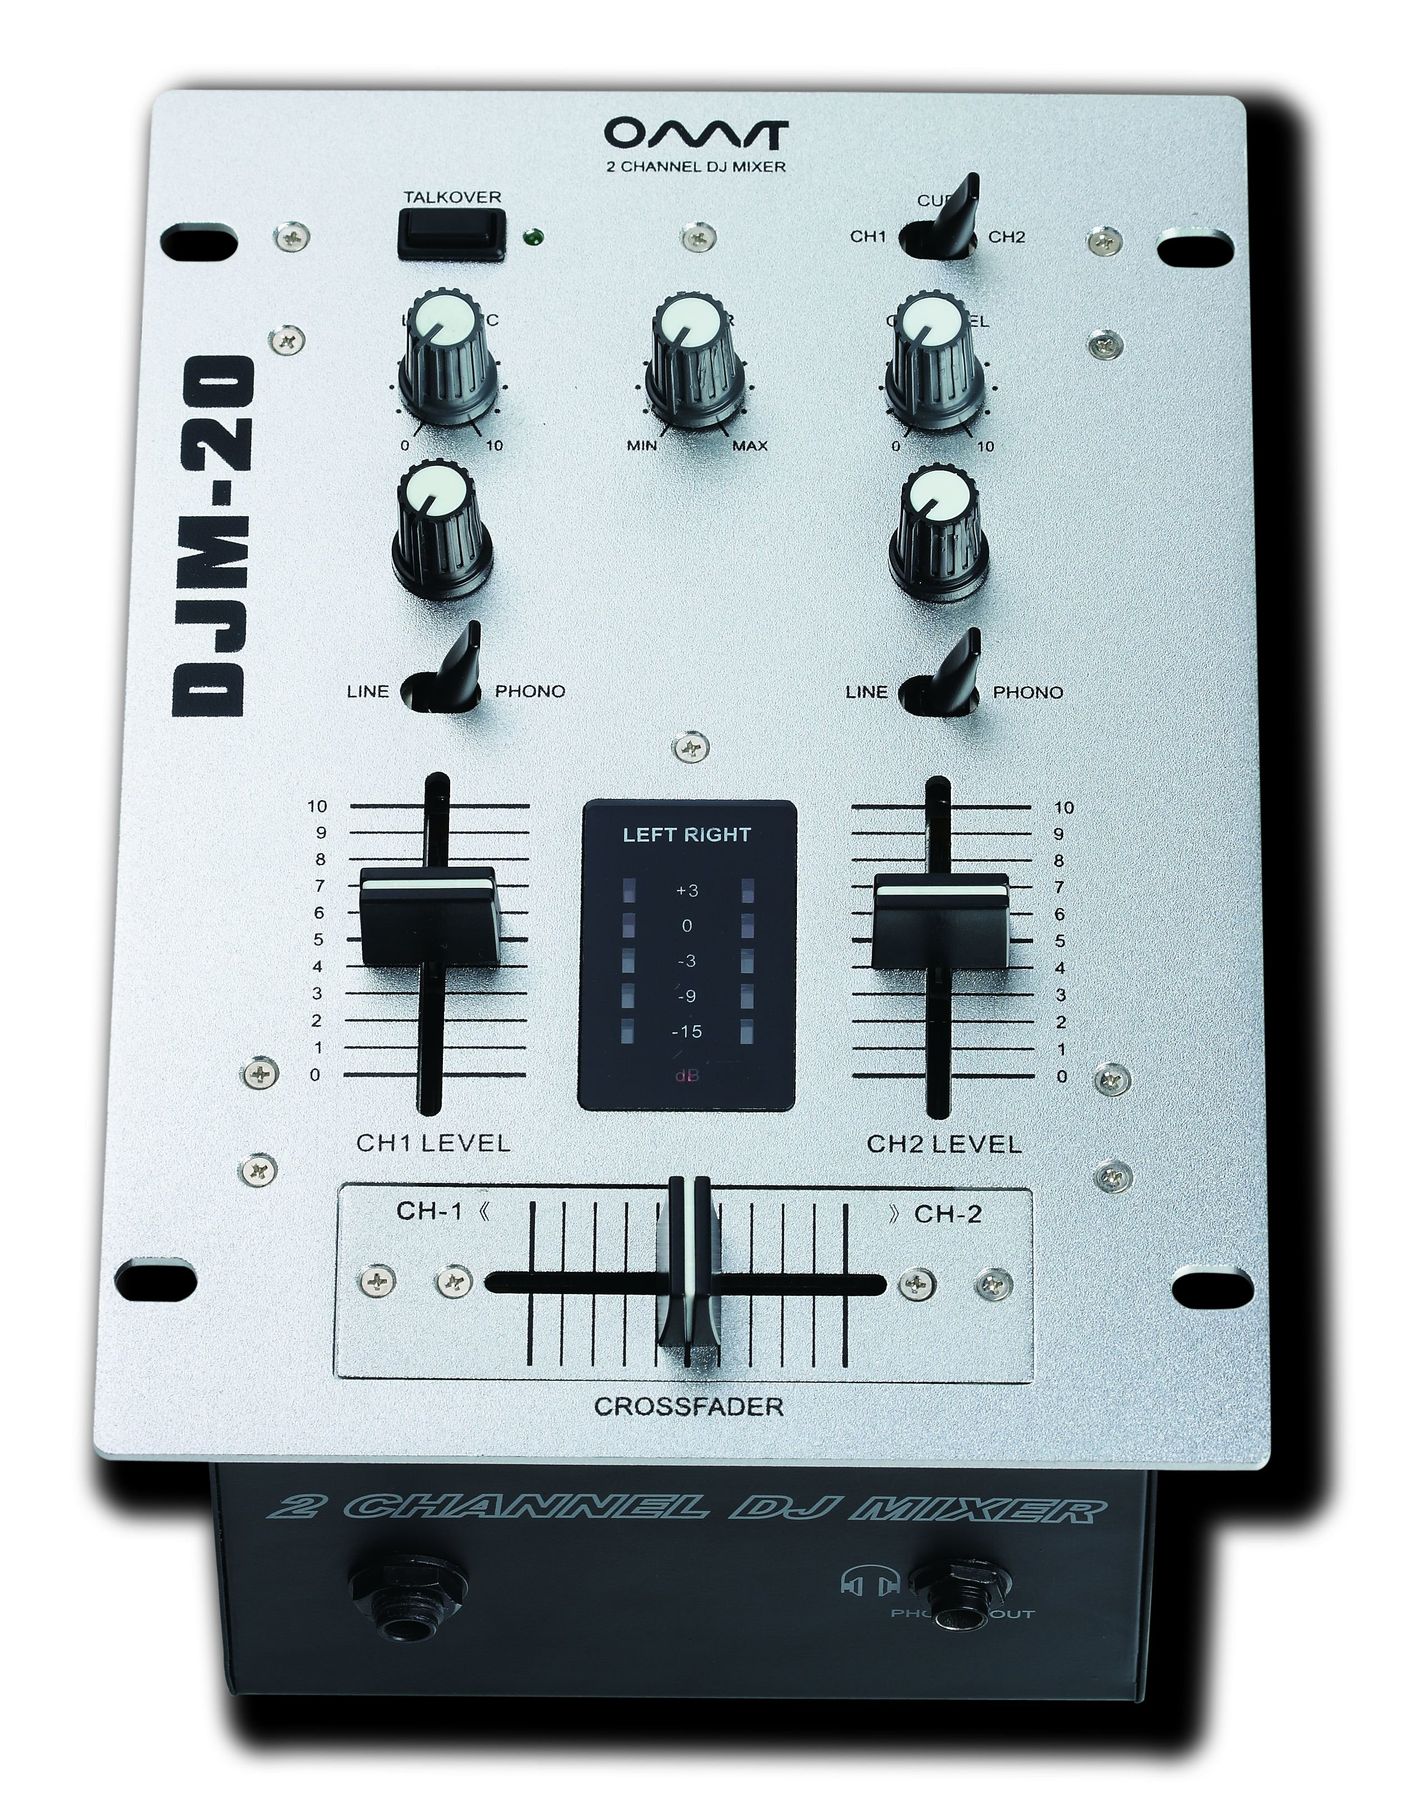 forligsmanden Fil skuffe DJM20 DJ Mixer 2 channel - Internet store of musical, sound and light  equipment for concerts, clubs, discos